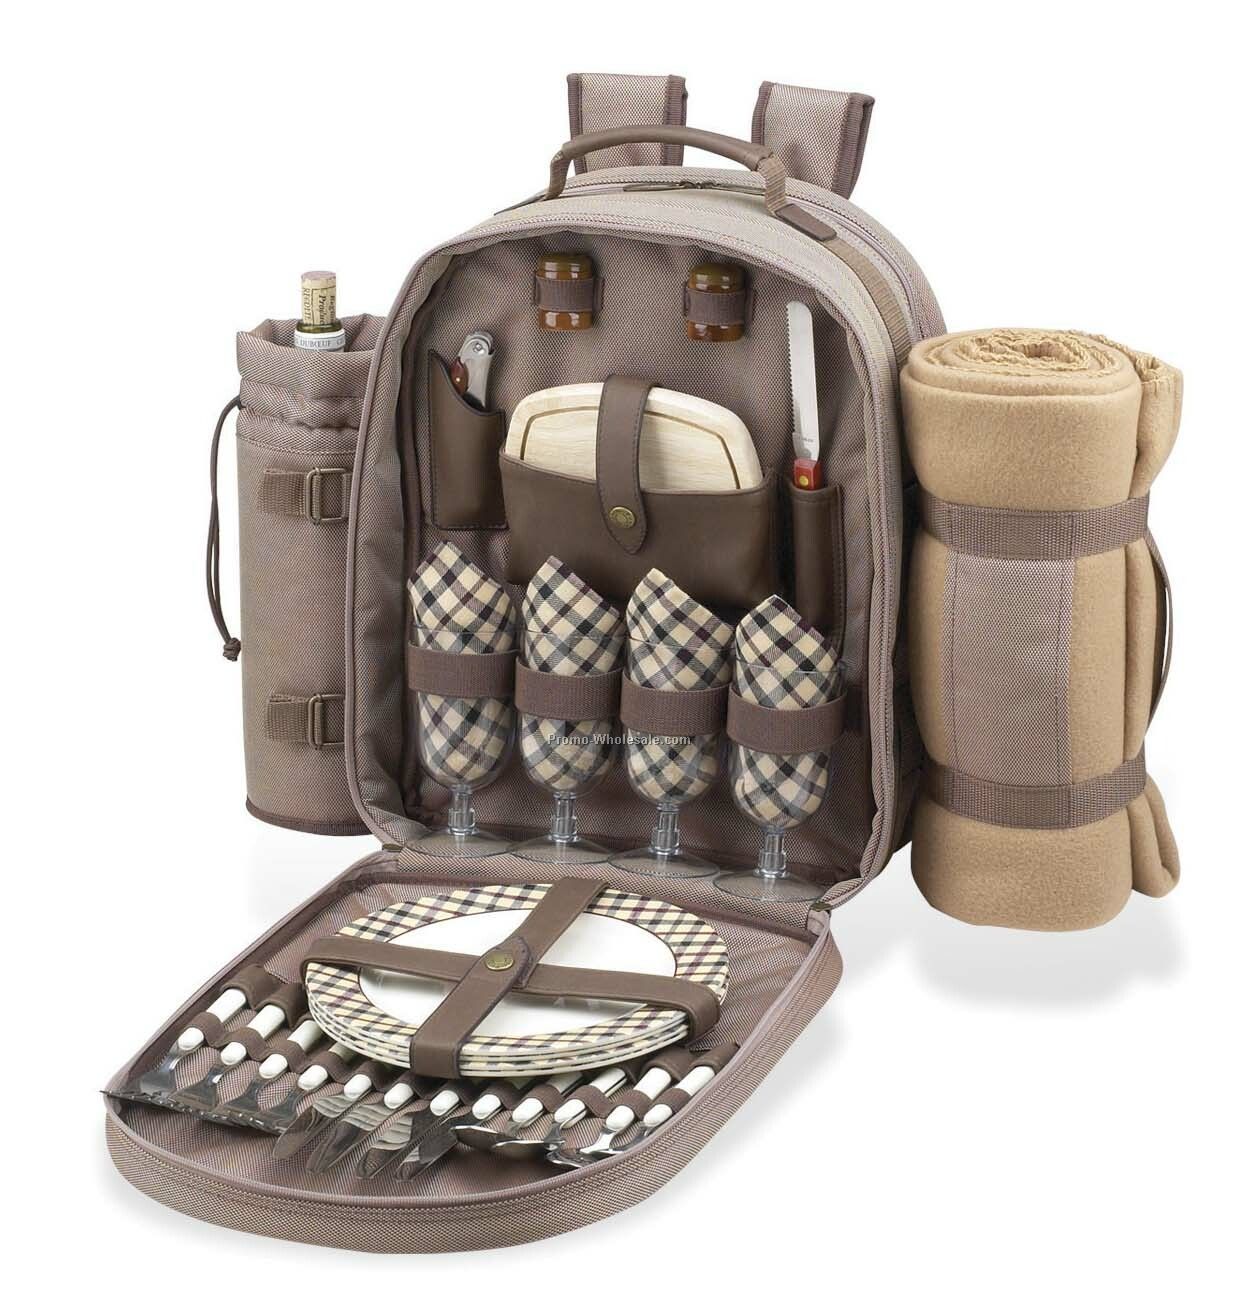 15"x16"x6.5" Picnic Backpack With Blanket For Four